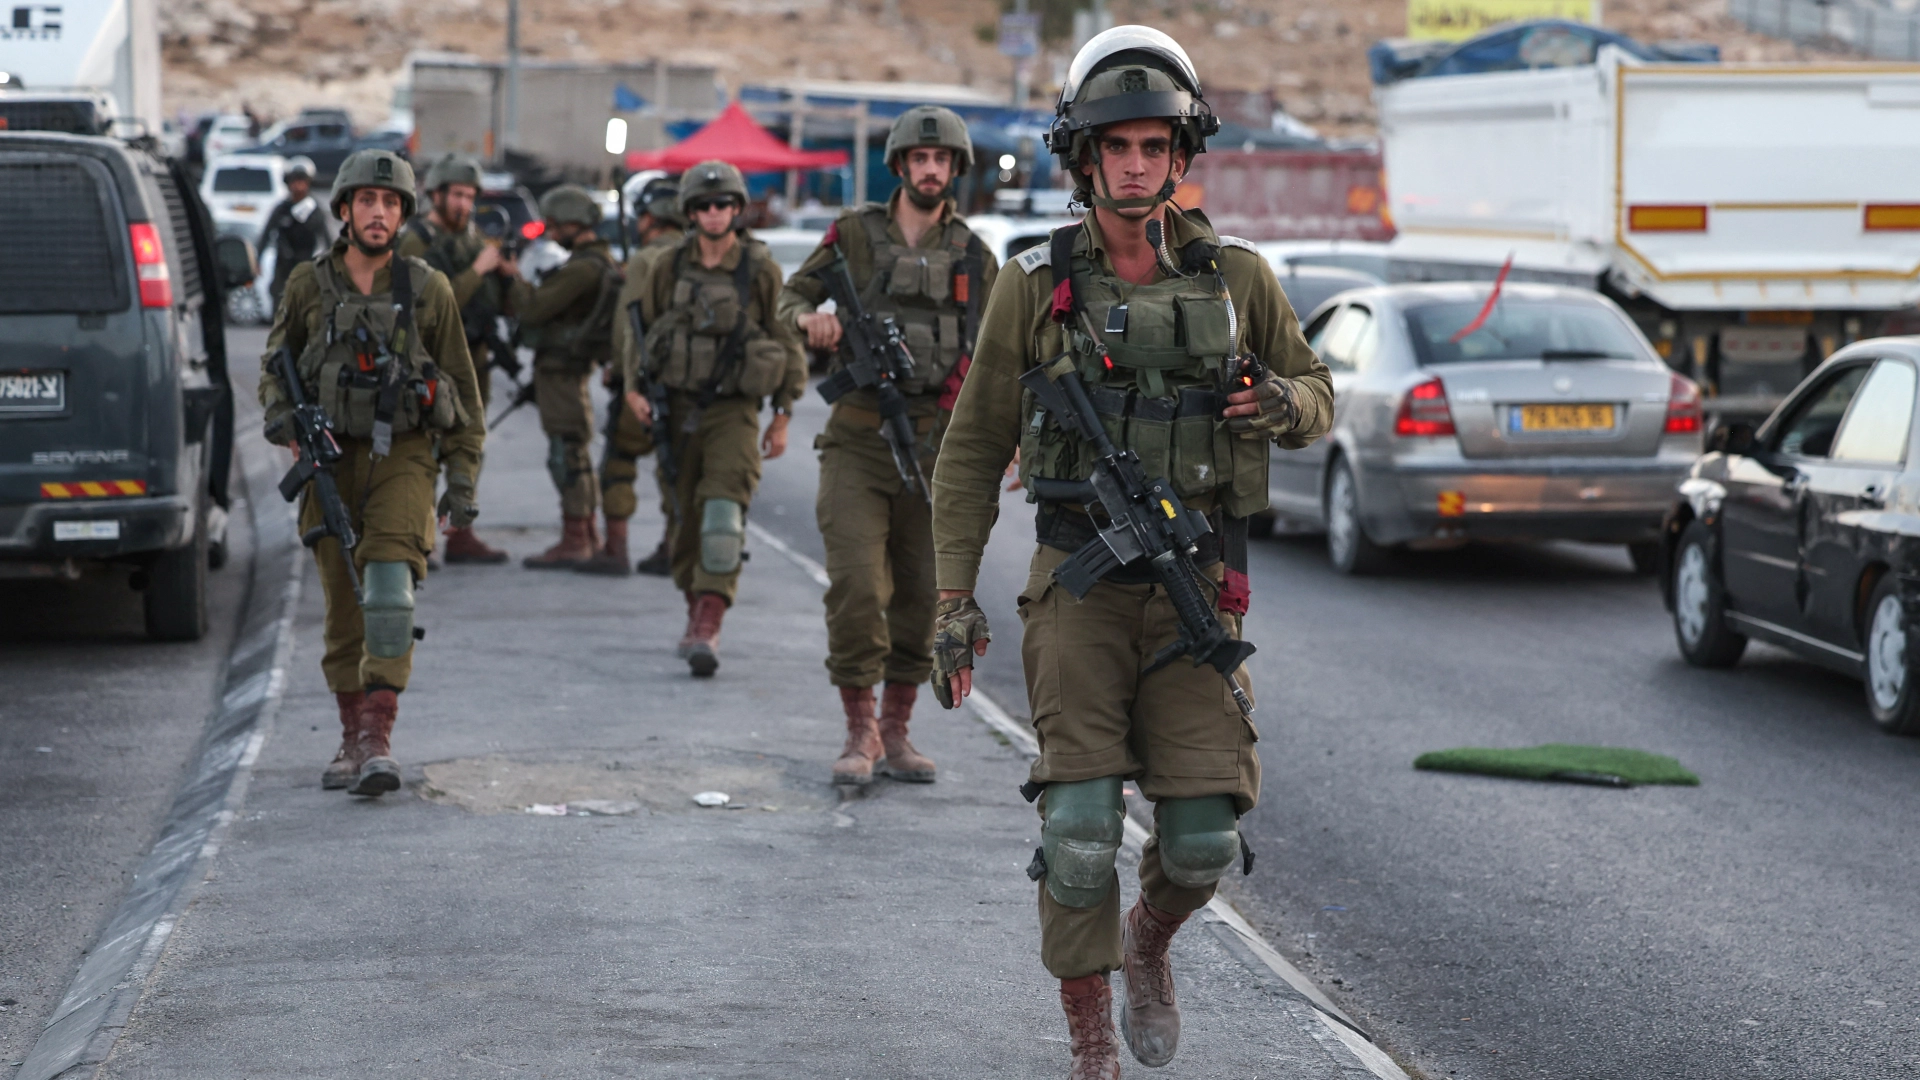 Israeli Occupation Forces Imped Palestinians' Movement in Jenin